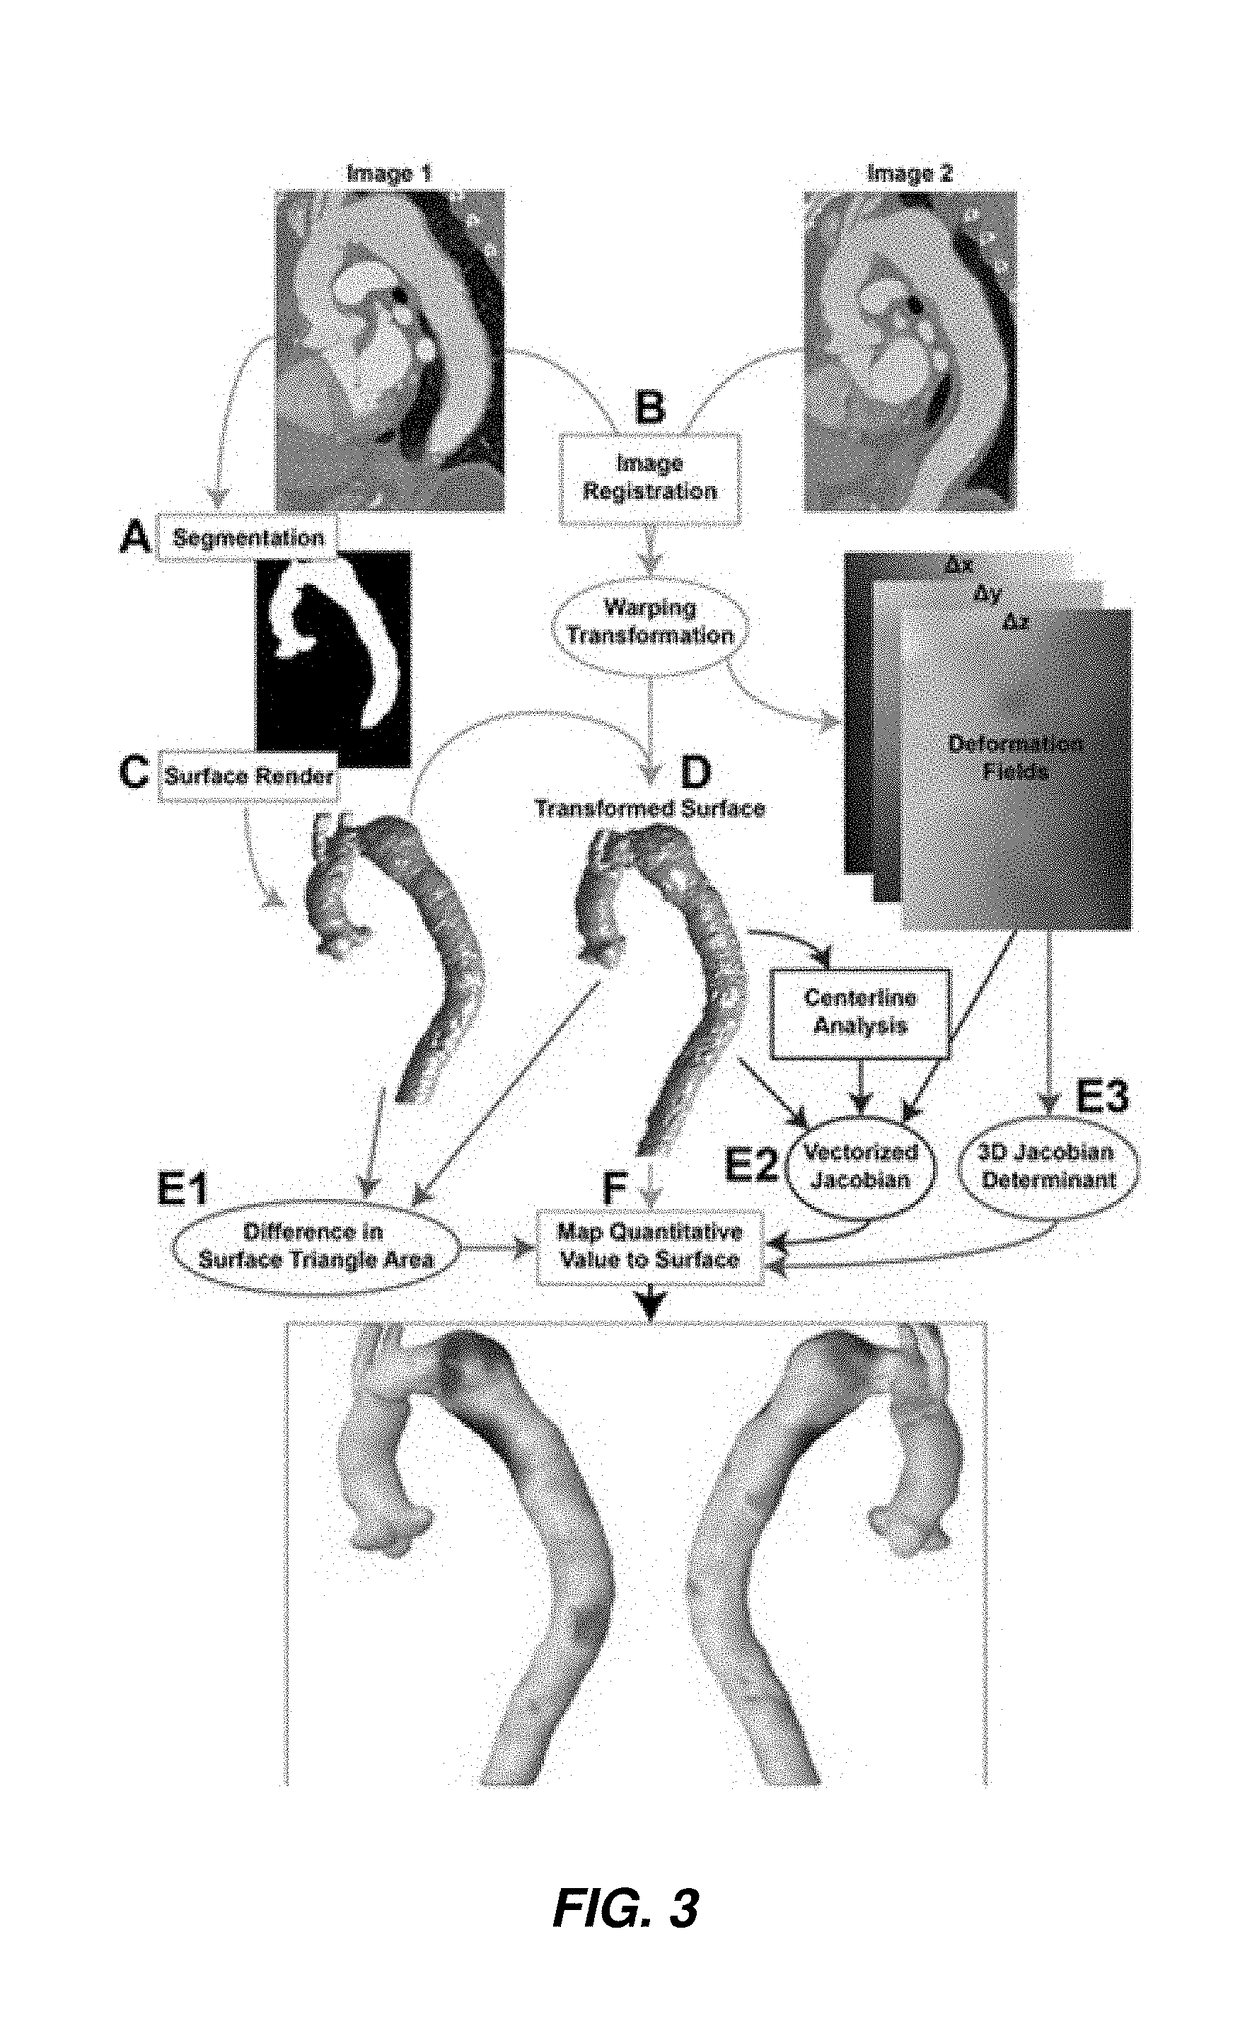 Techniques of deformation analysis for quantification of vascular enlargement